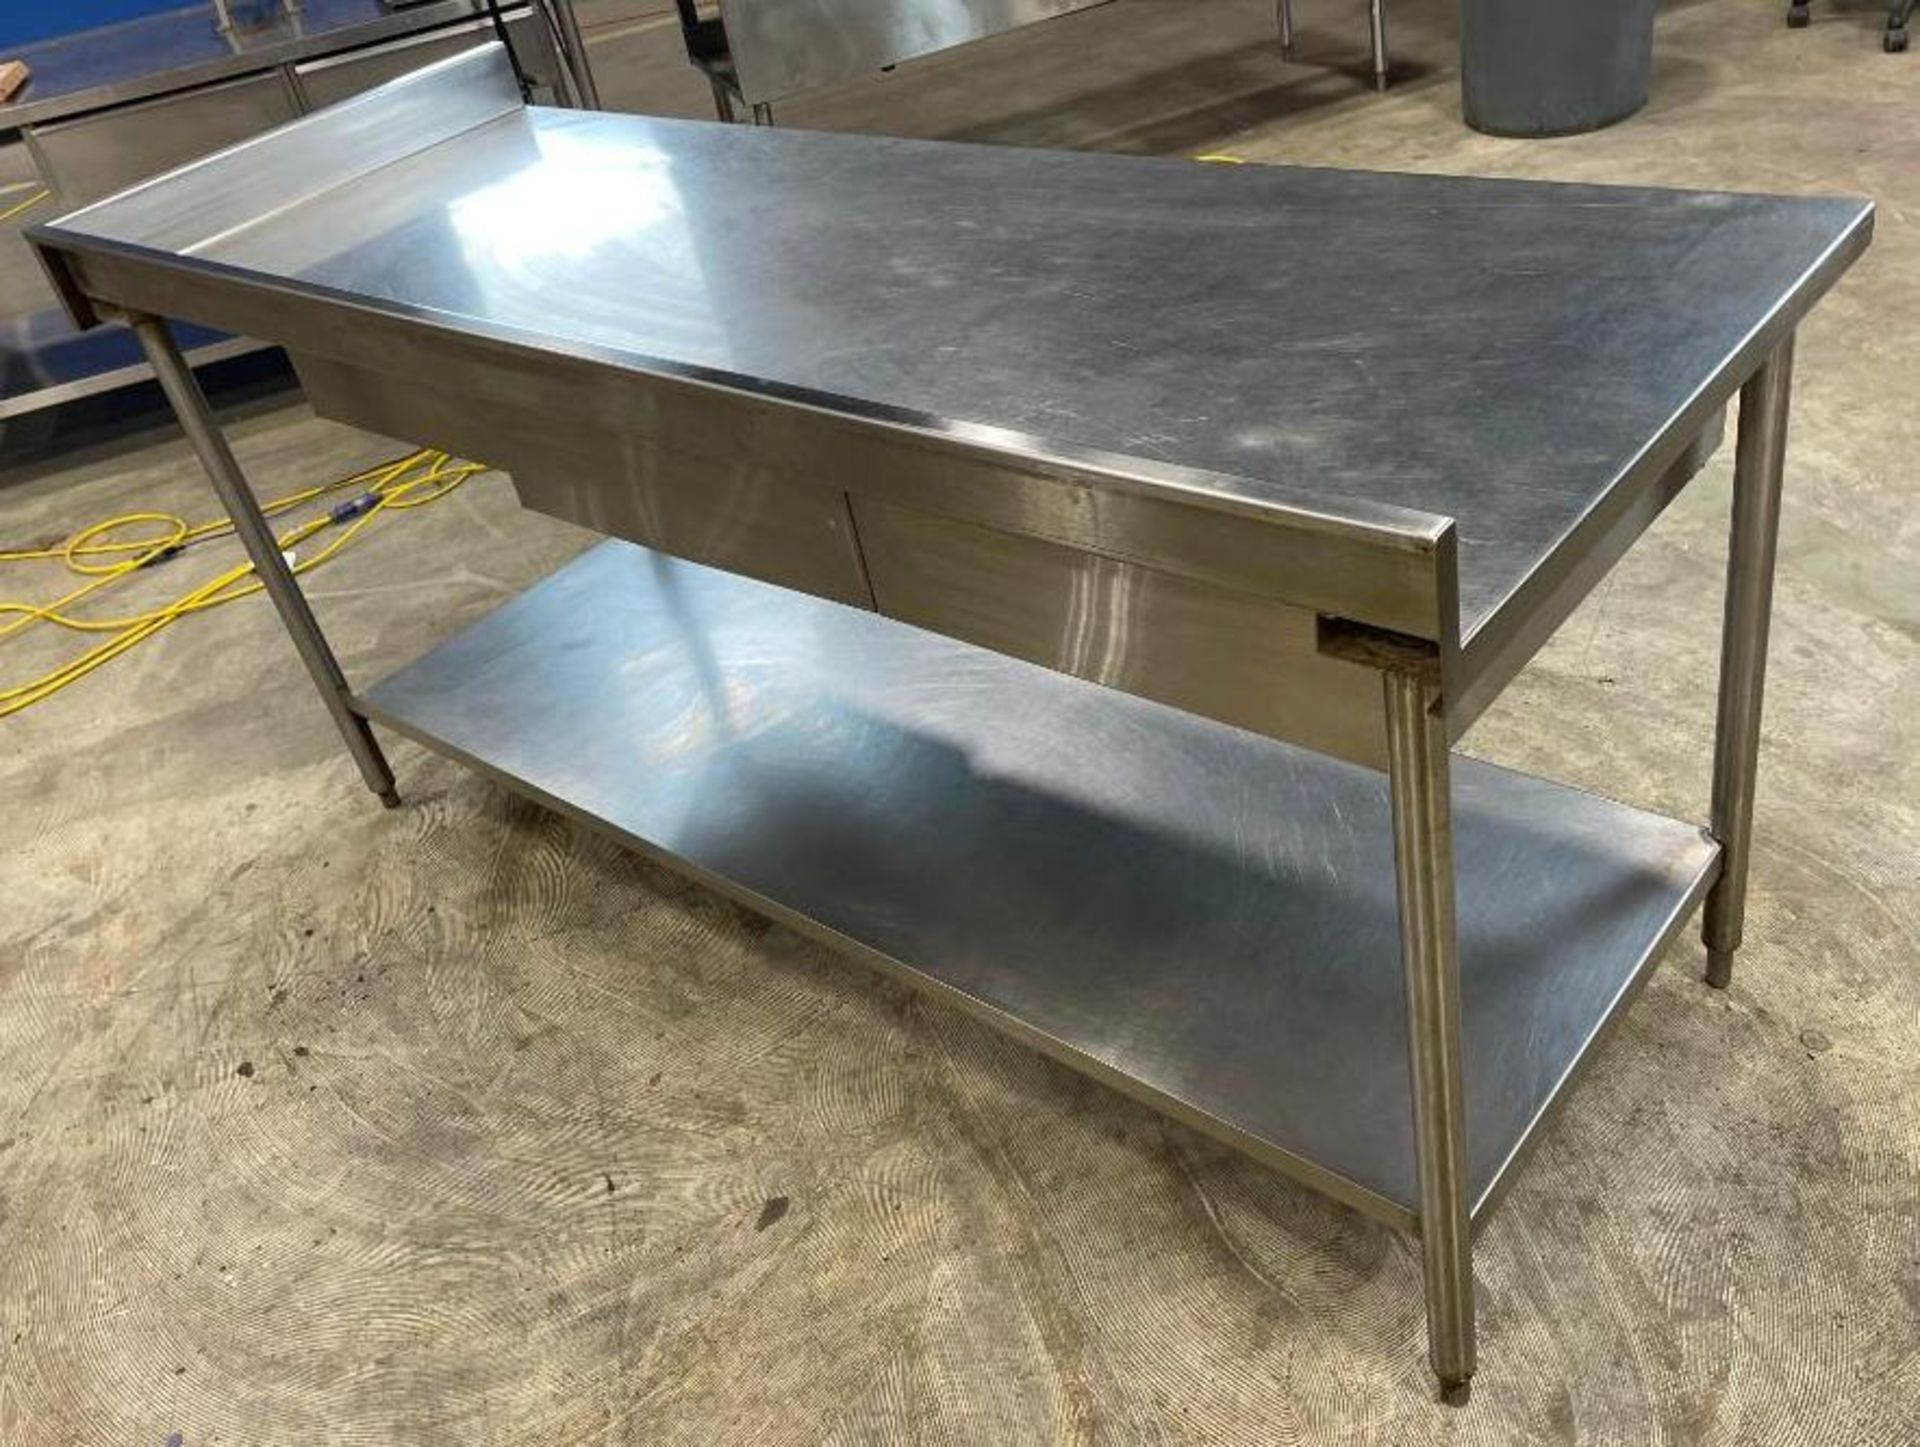 STAINLESS STEEL WORK TABLE WITH 3 DRAWERS AND UNDERSHELF - Image 5 of 11